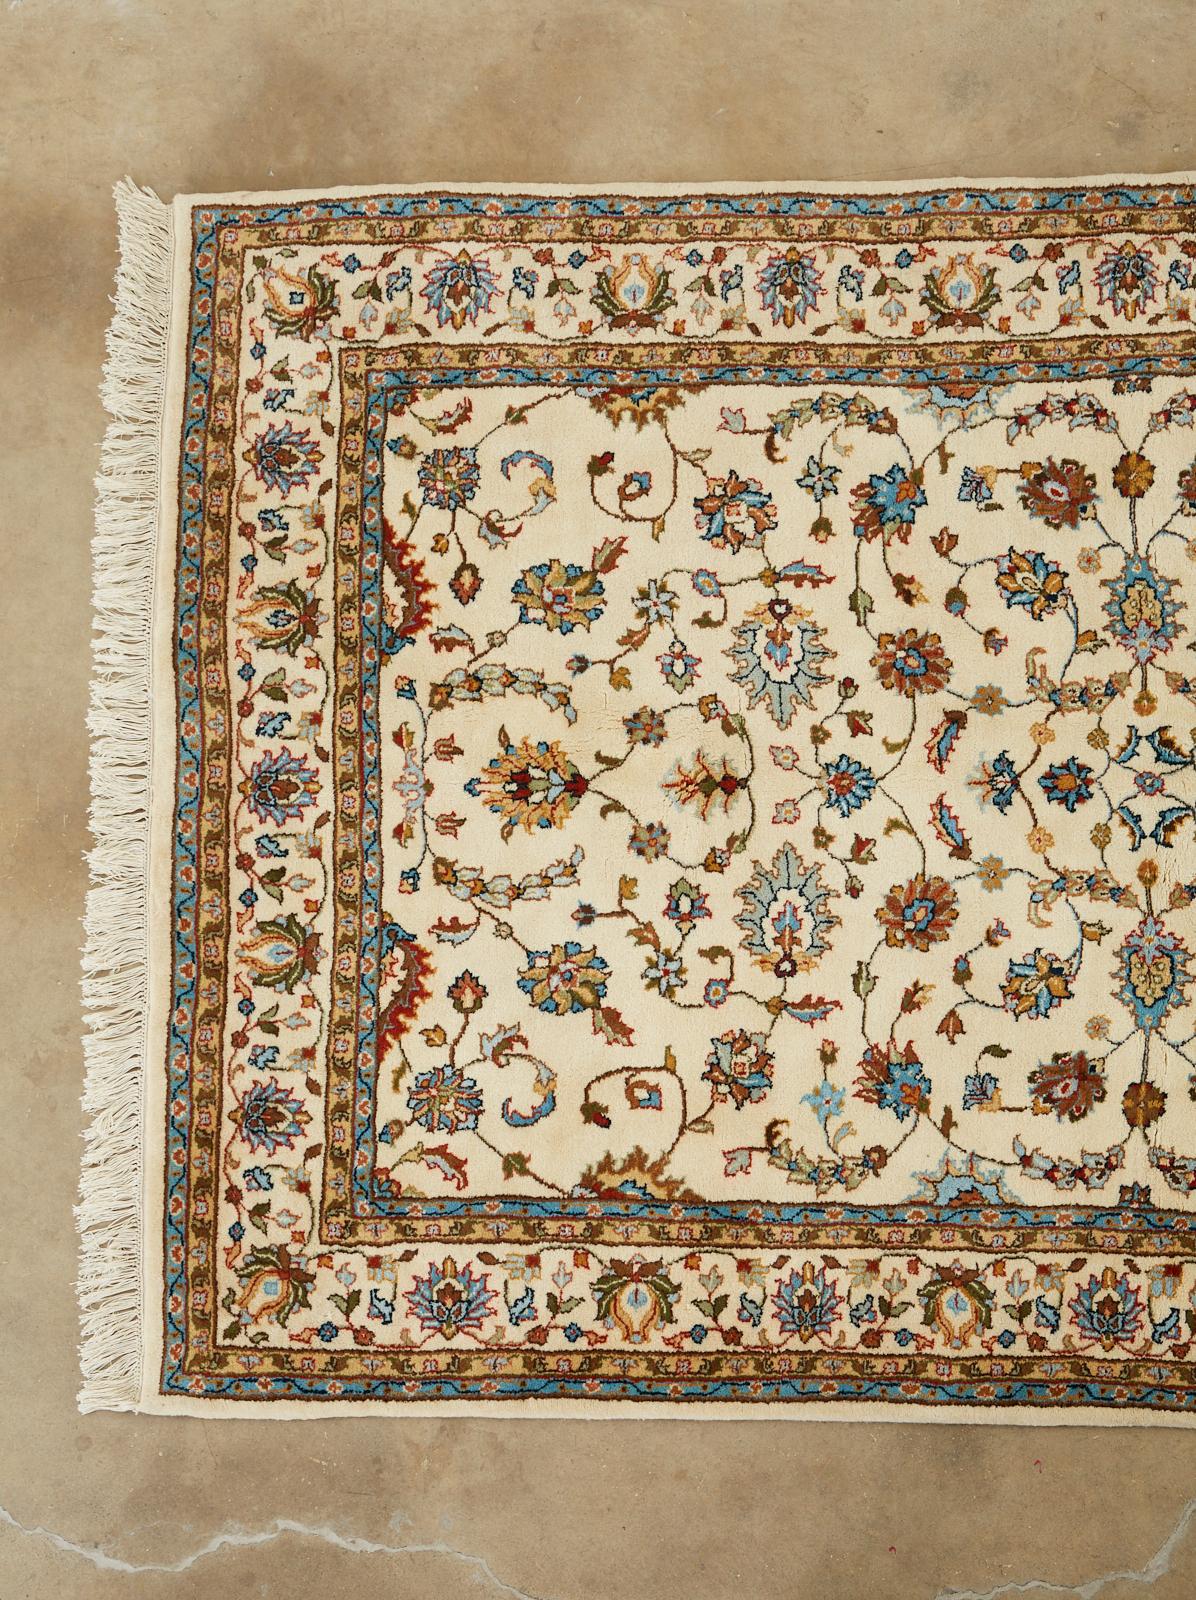 Hand knotted wool Indo Persian Kashan rug featuring a cream ivory colored field decorated with Classic floral vine motif and palmettes. The open designs allow vivid colored palmettes to stand out boldly. The rug was crafted with a deep, dense soft